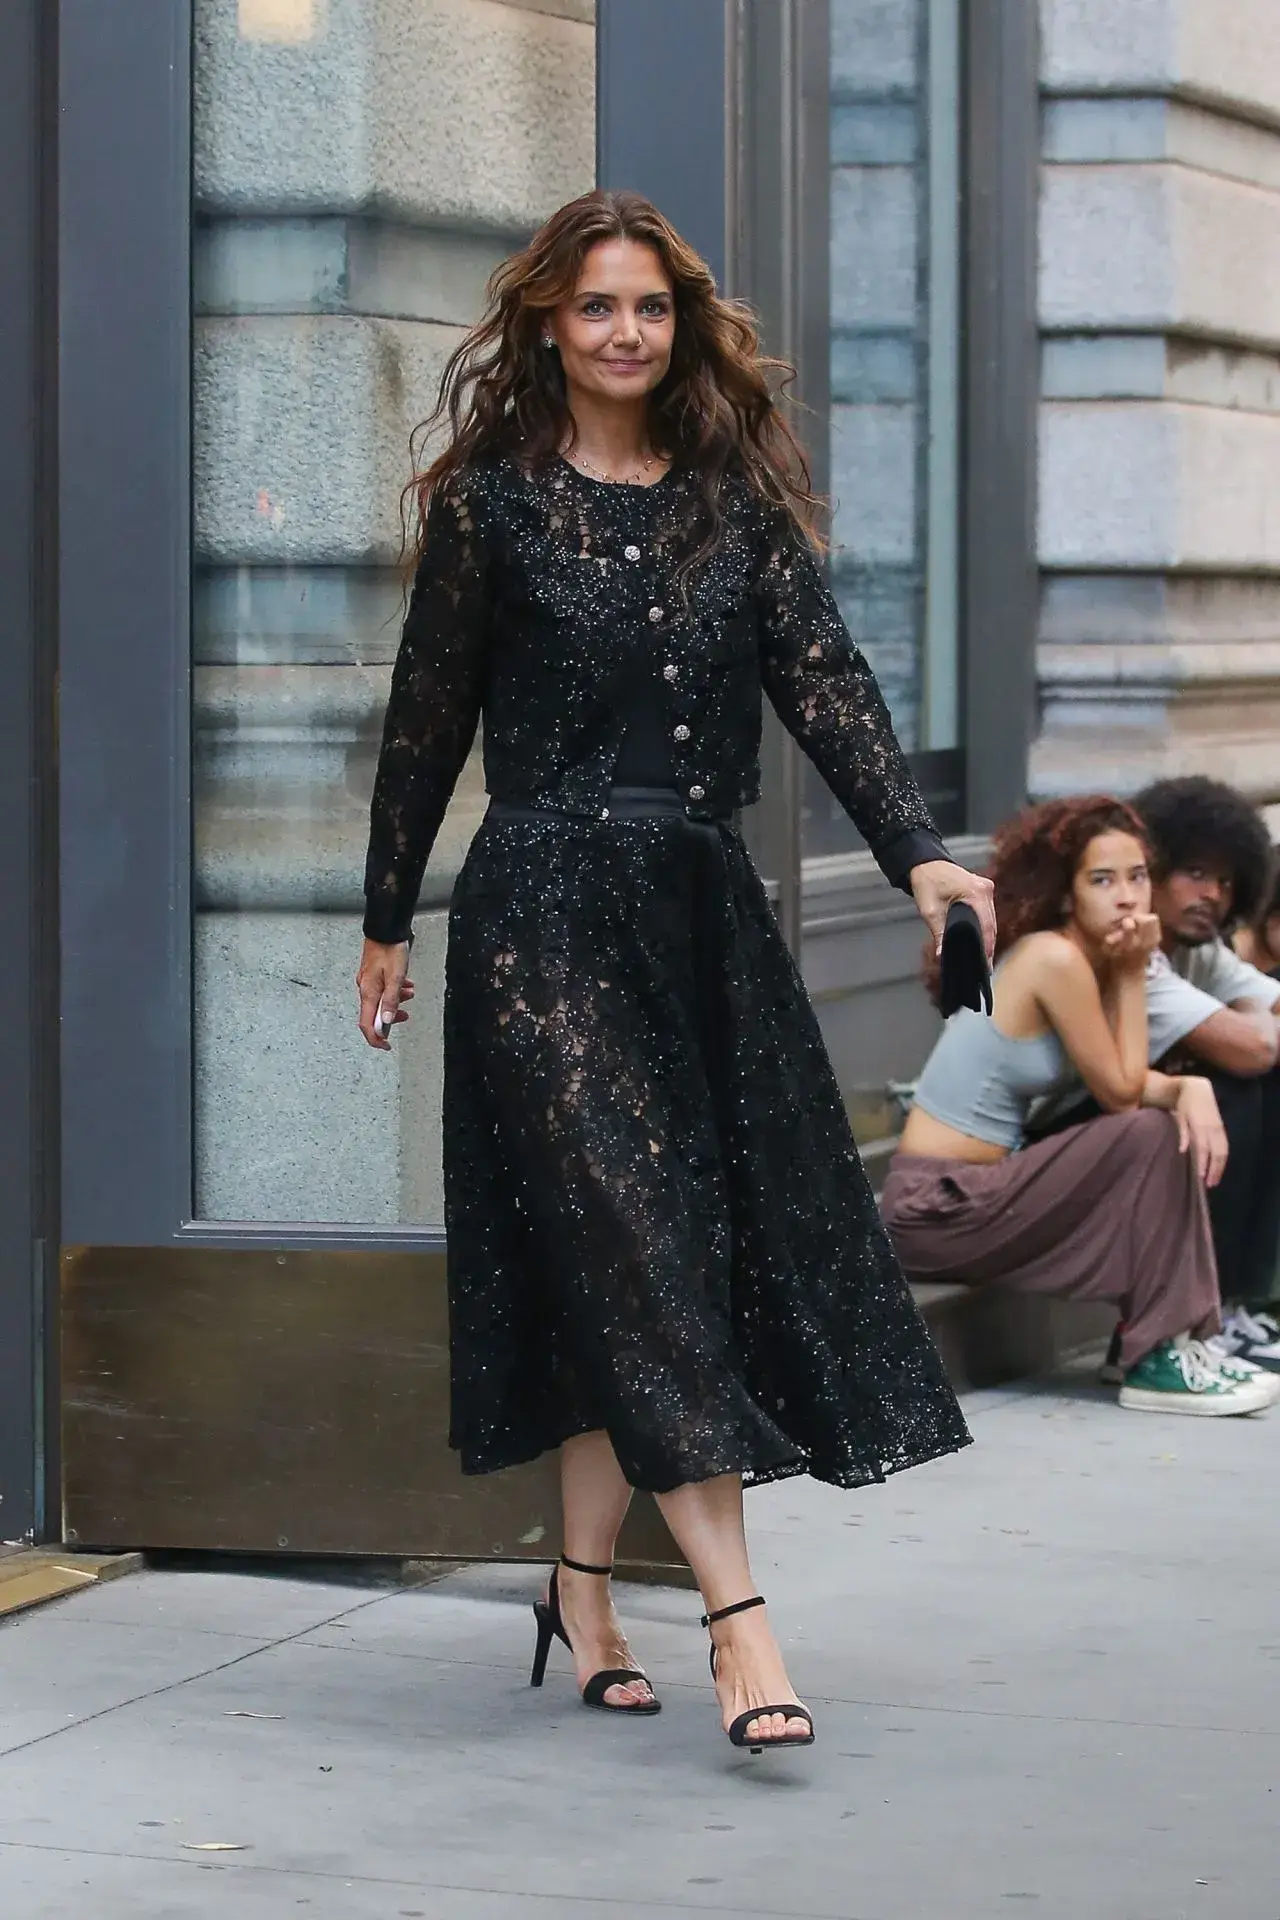 KATIE HOLMES SEEN IN A STUNNING BLACK DRESS IN NEW YORK CITY STREETS 6